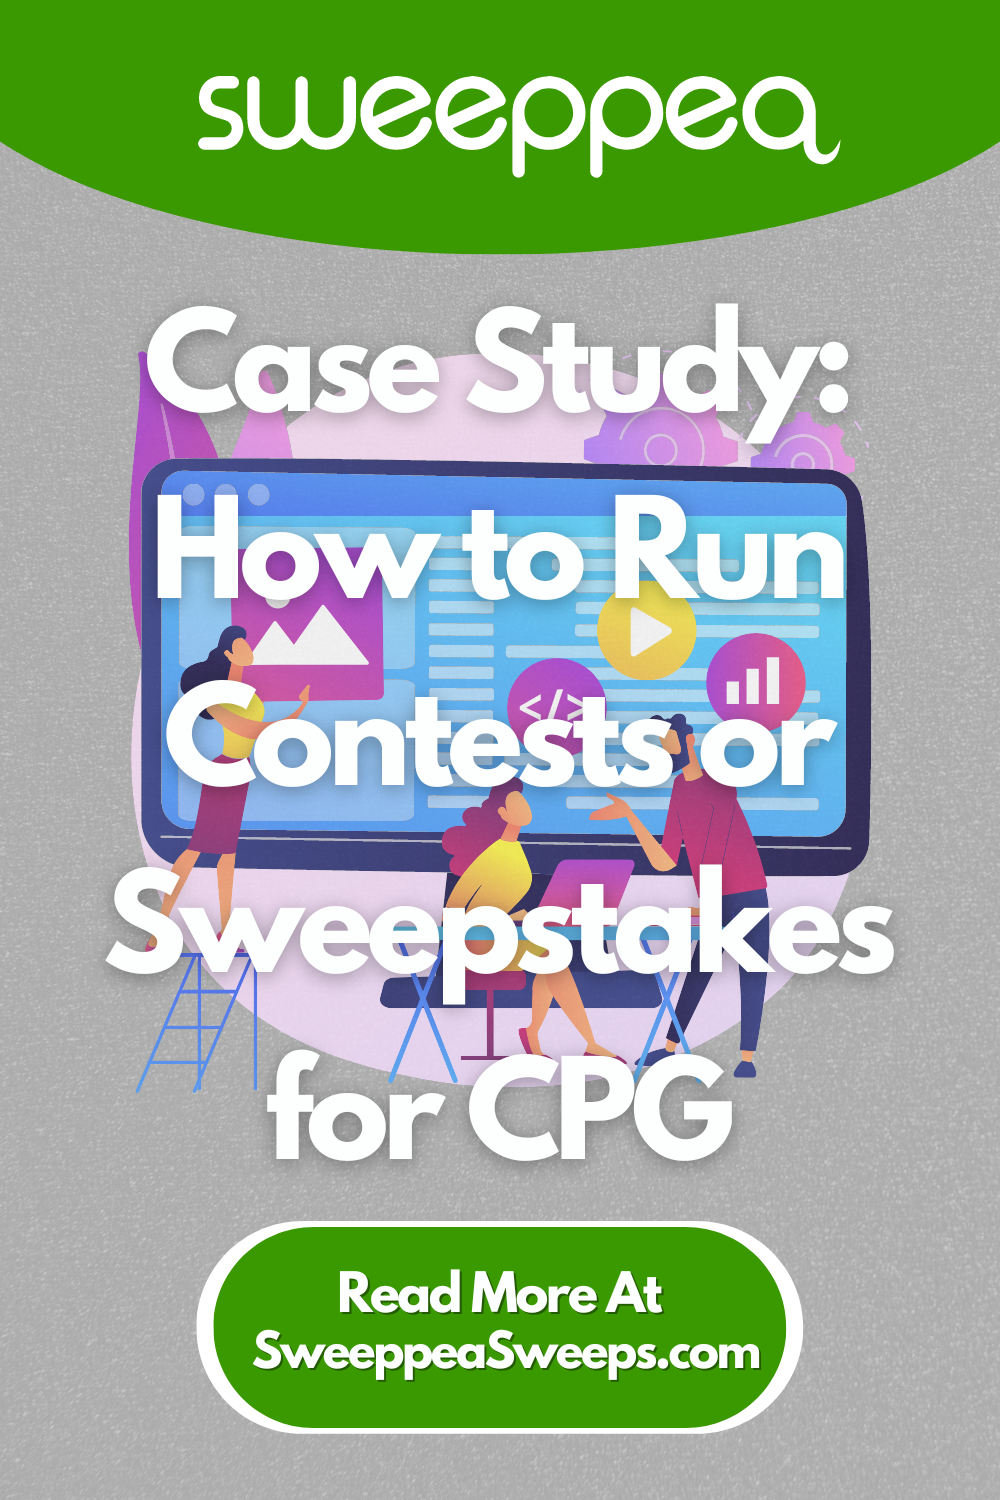 Case Study How to Run Contests or Sweepstakes for CPG